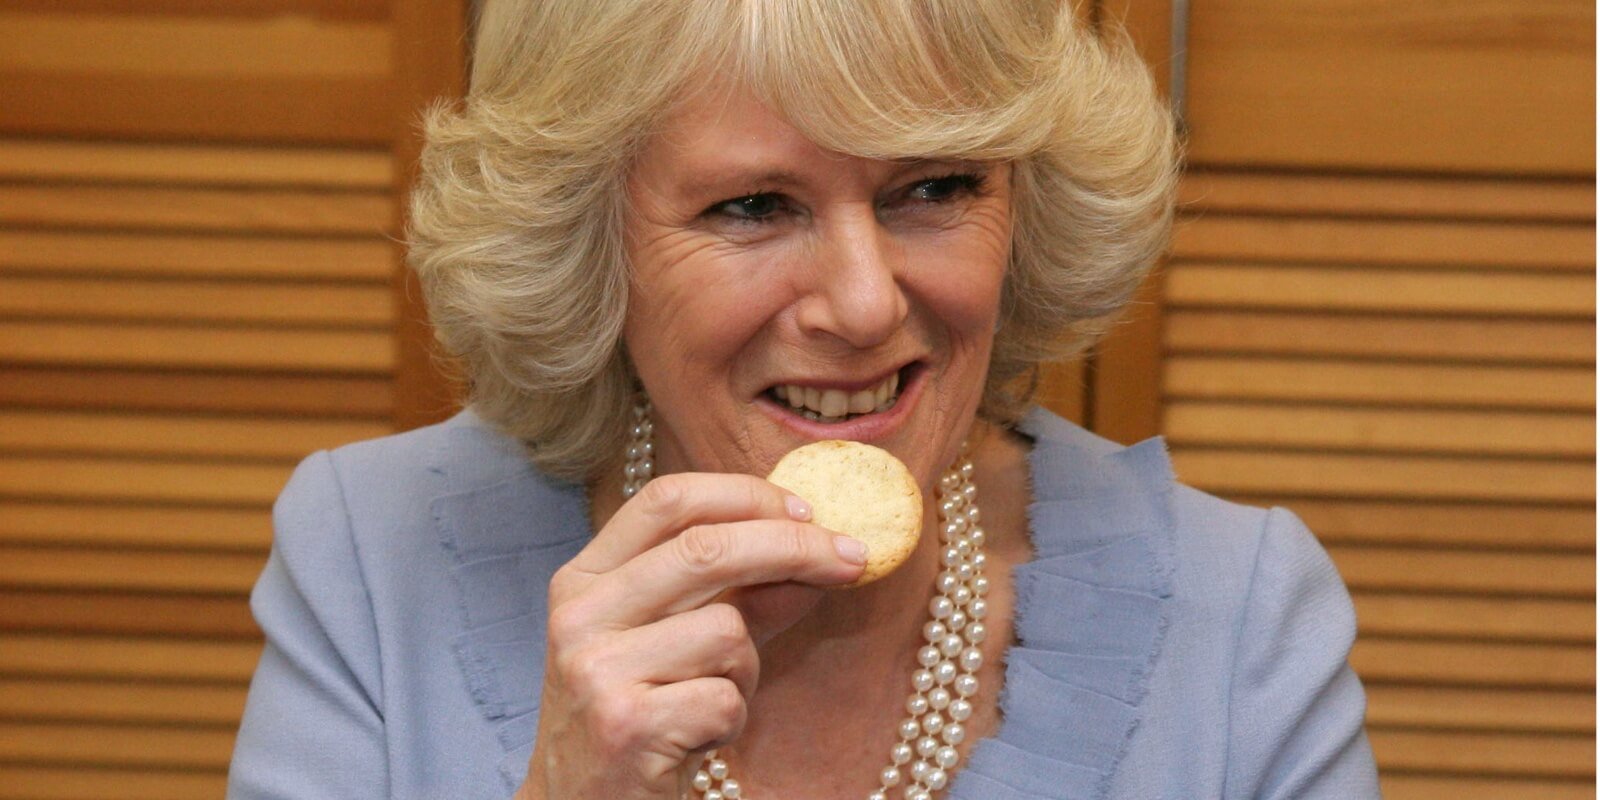 Camilla Parker Bowles is seen eating a cookie on January 27, 2007 in Philadelphia, USA.